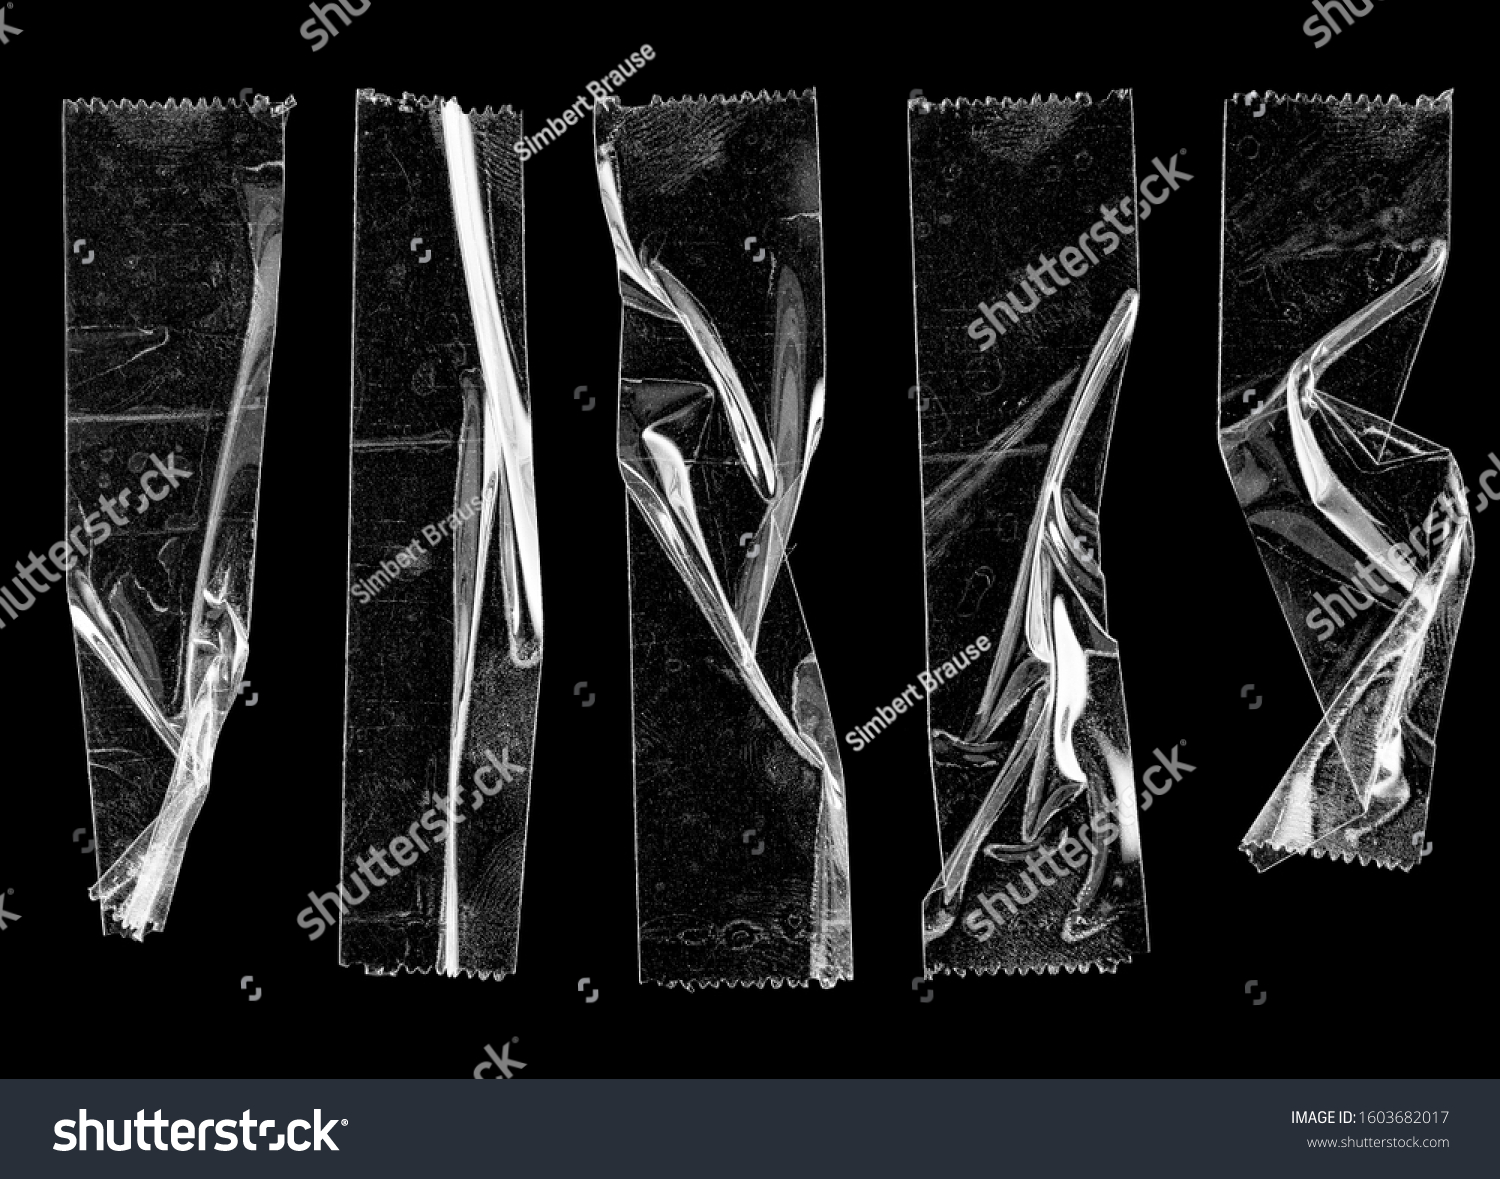 set of transparent adhesive tape or strips isolated on black background, crumpled plastic sticky snips, poster design overlays or elements.  #1603682017